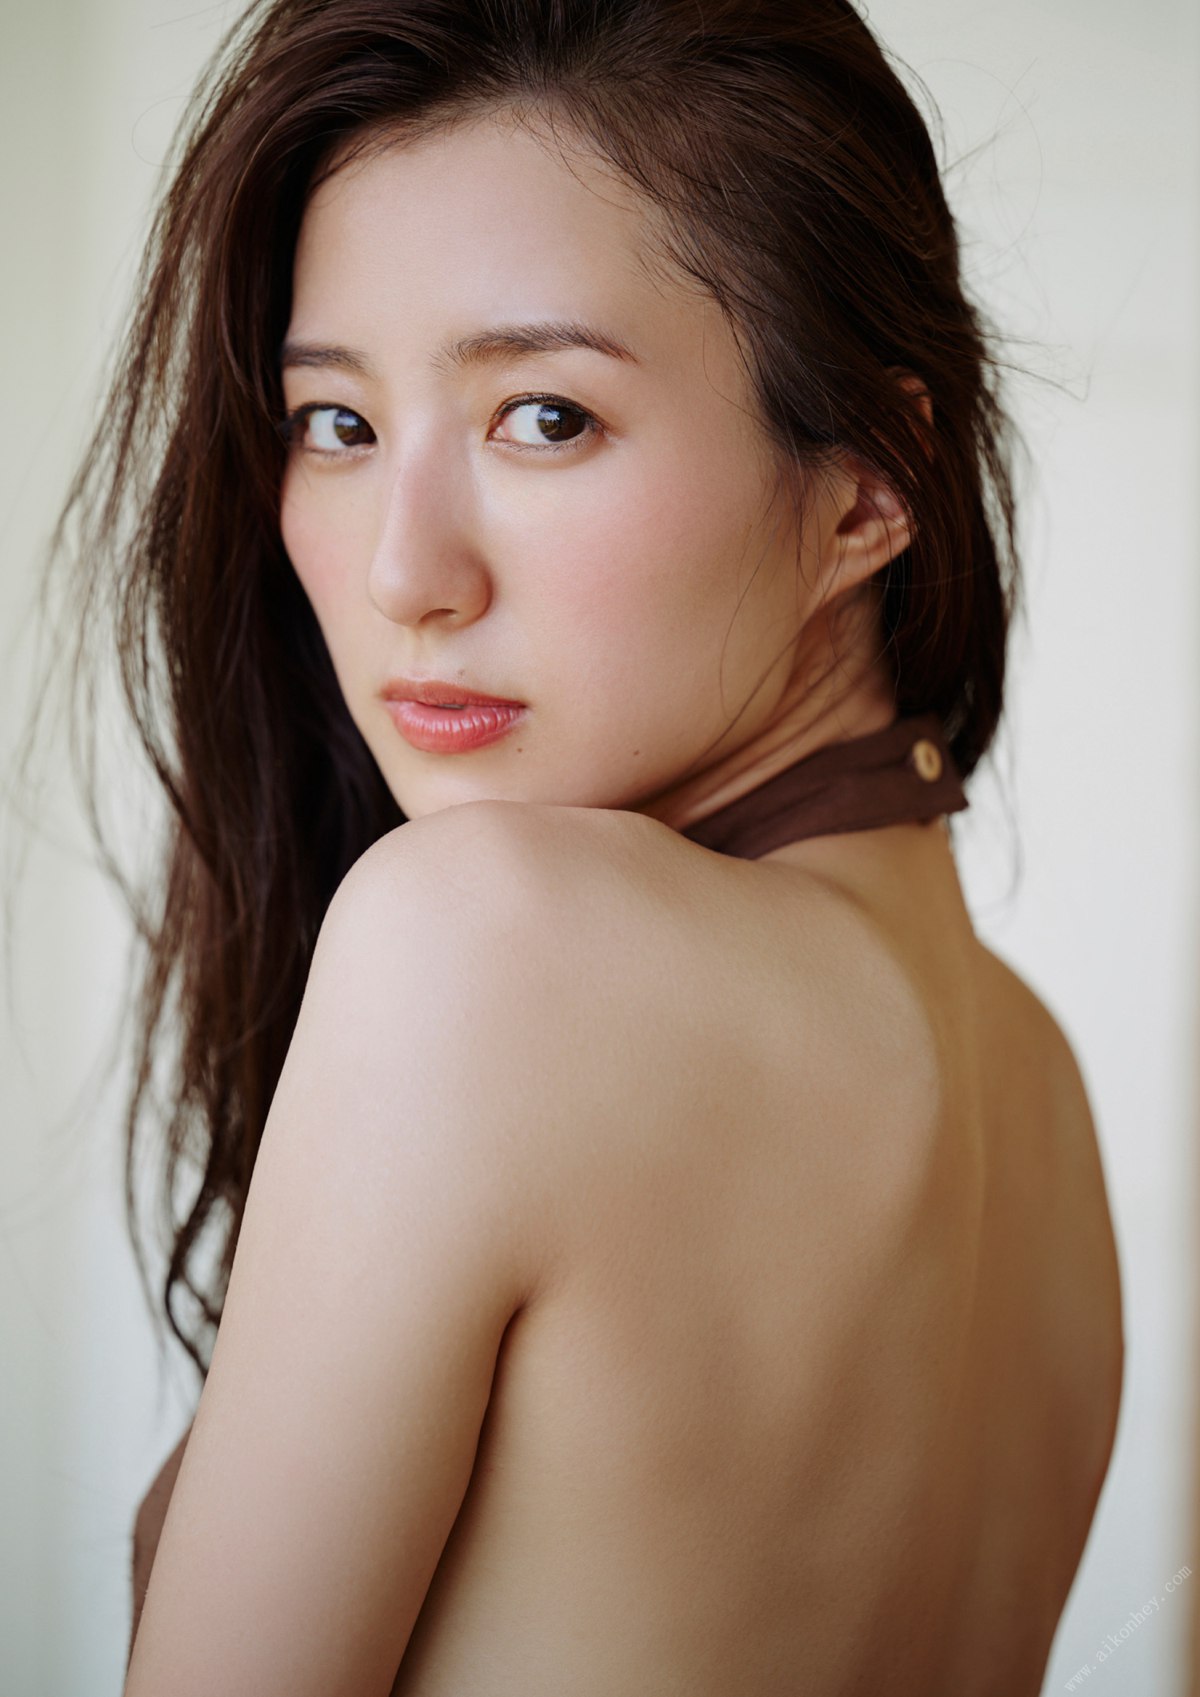 Weekly Pre Photo Book 2022 10 31 Riho Takada 高田里穂 Completed Unfinished Another Edition 0035 3010739136.jpg